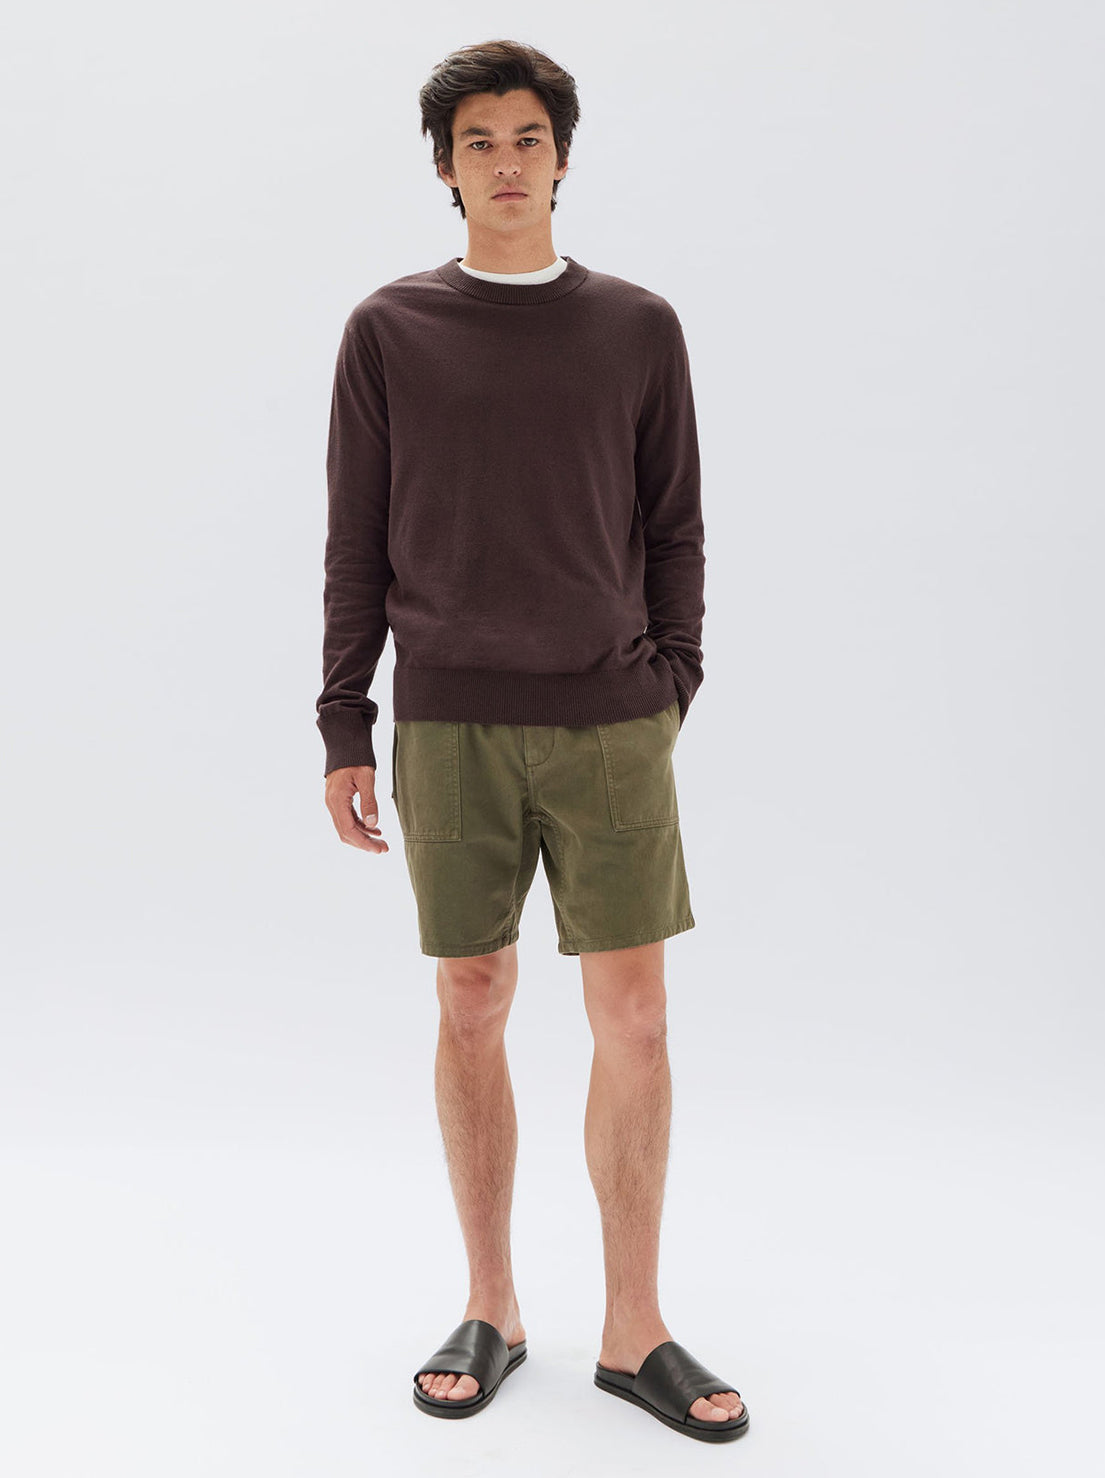 Assembly - Mens Cotton Cashmere Long Sleeve Sweater - Chestnut